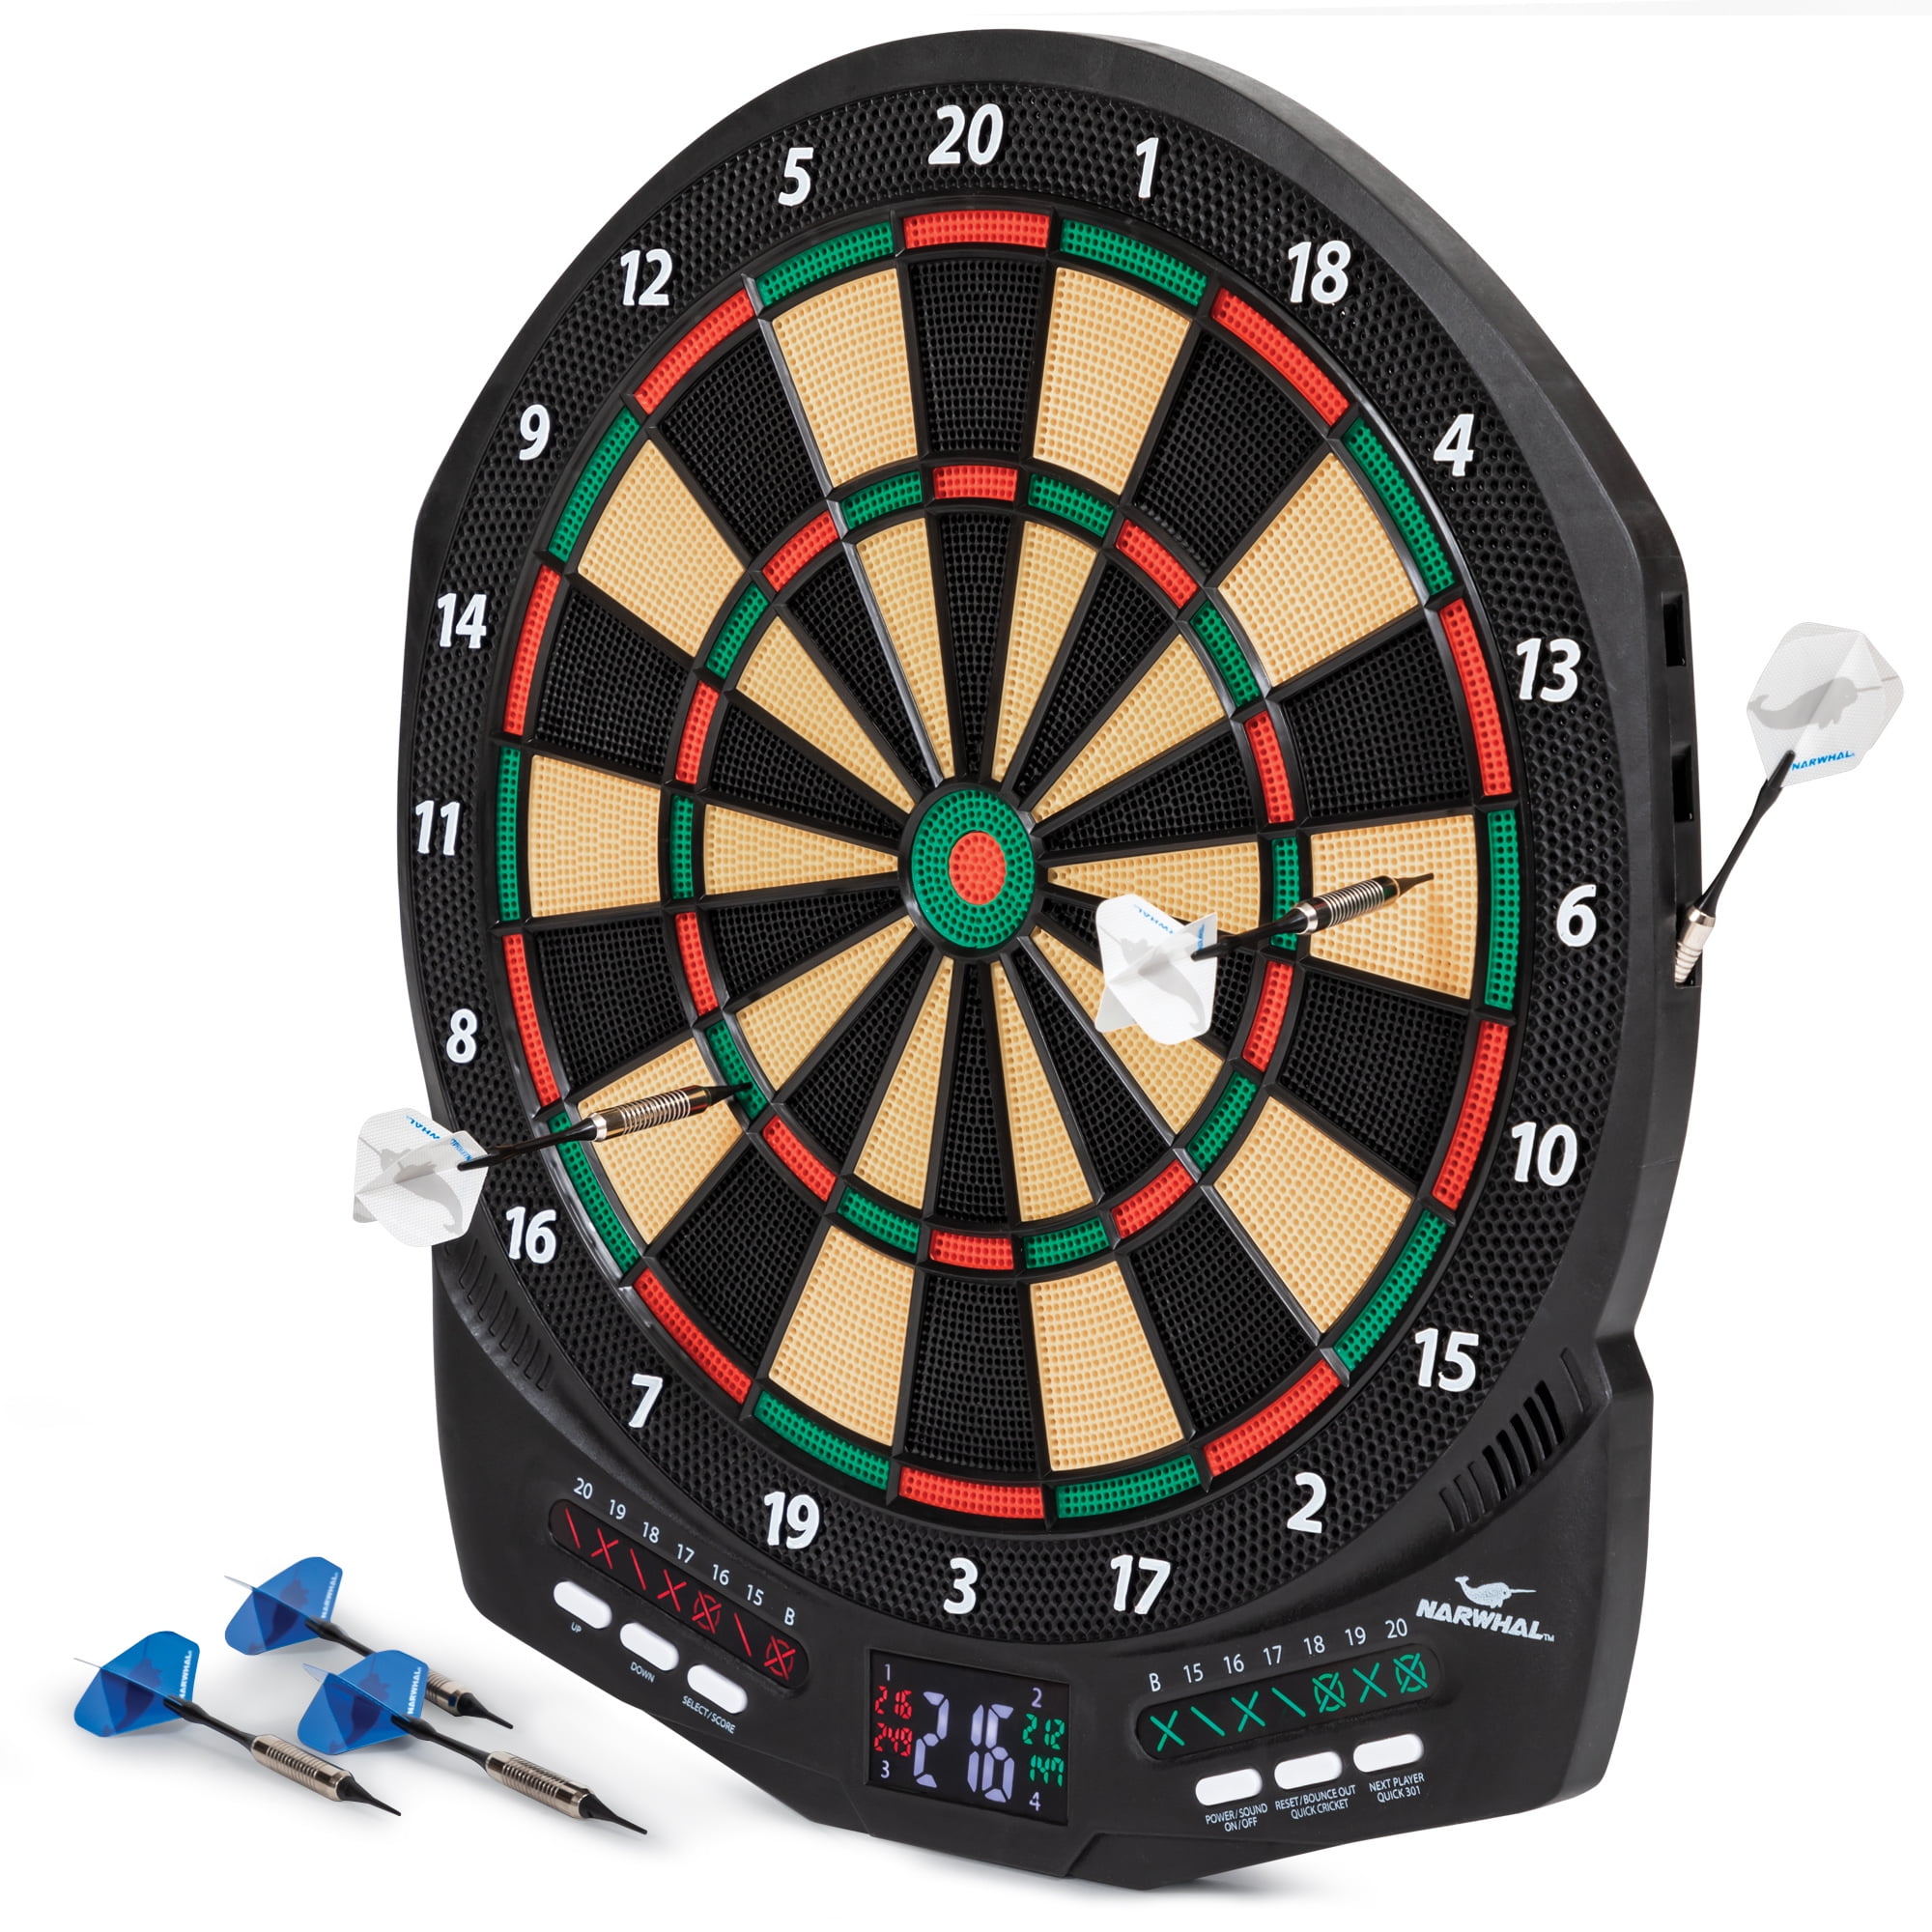 Narwhal Revolution Electronic Dartboard with 30 Games, Scoring and 6 Darts